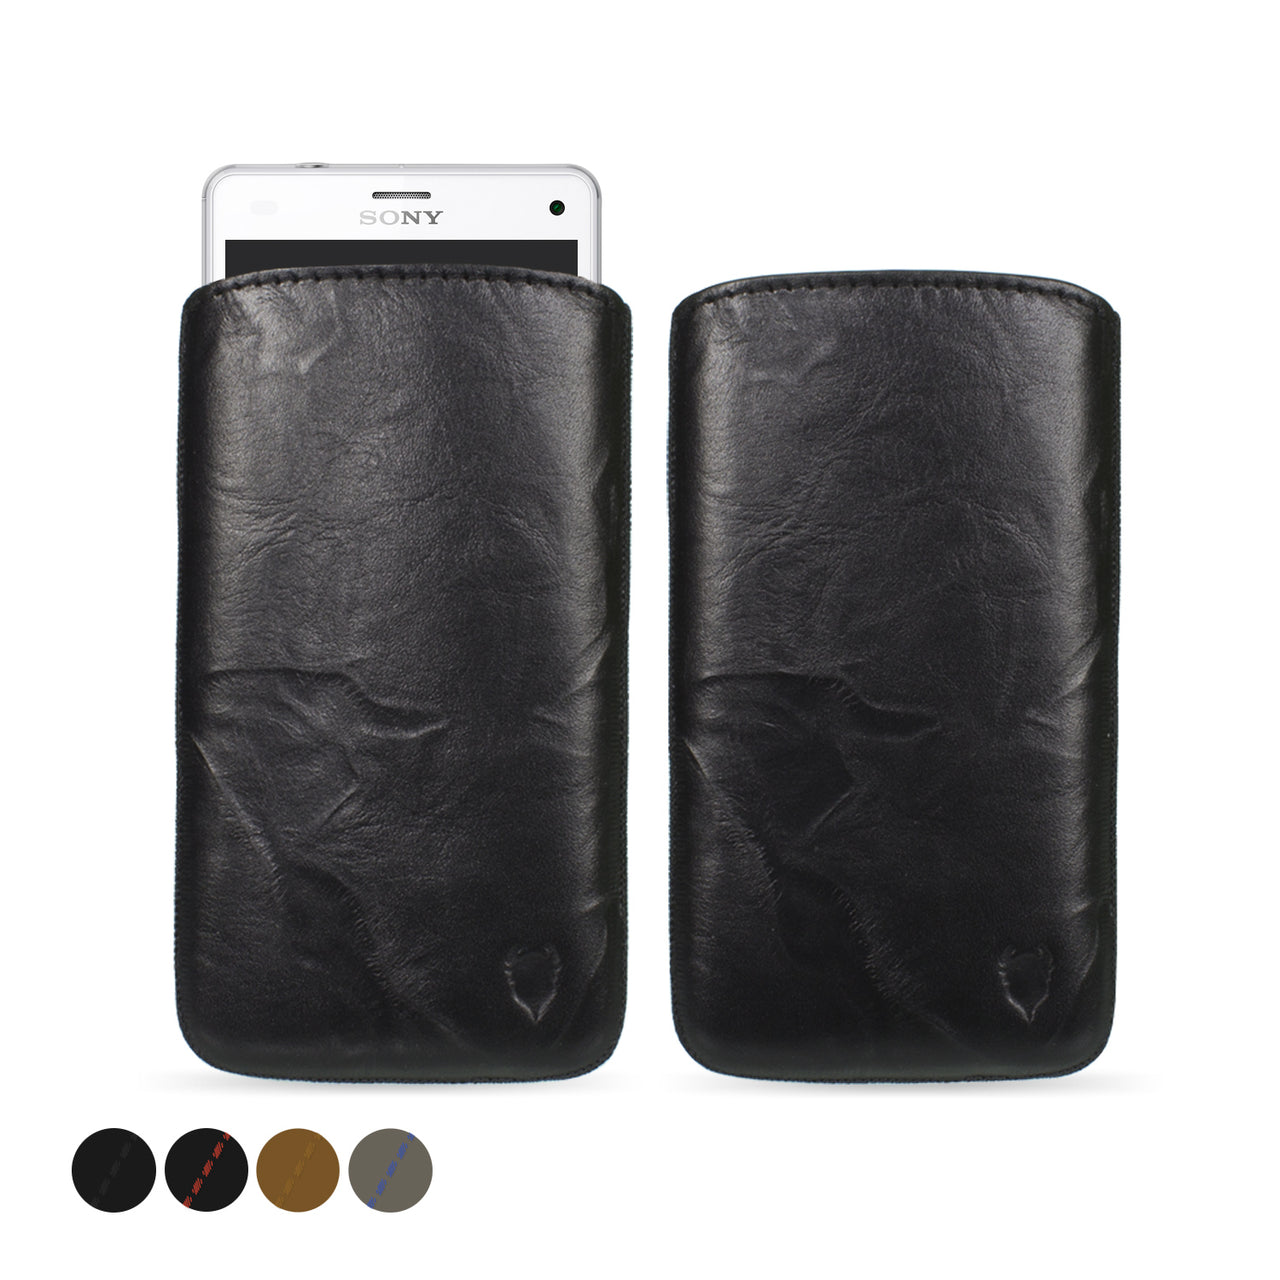 Sony Xperia Z3 Compact Genuine Leather Pouch Sleeve Case | Artisanpouch